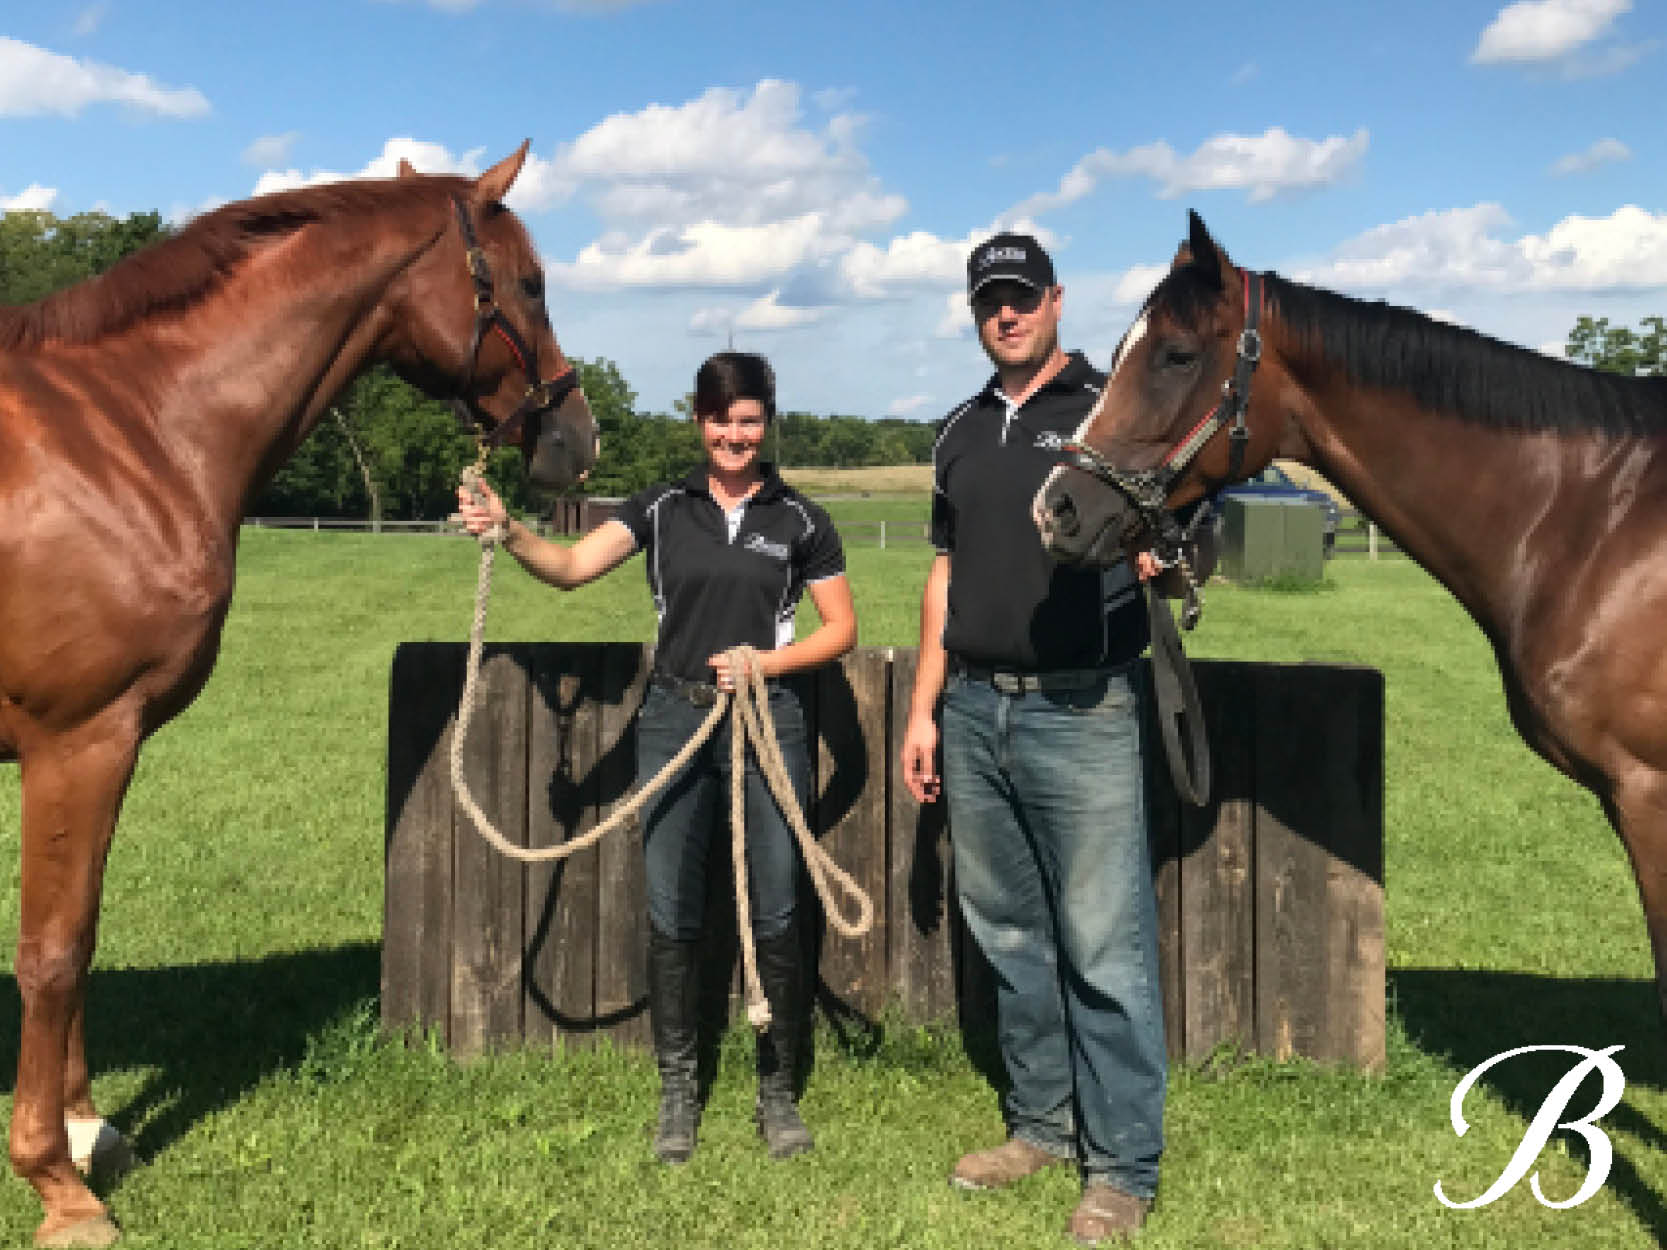 Behind the scenes at Elevation Dressage and Eventing (part 1)